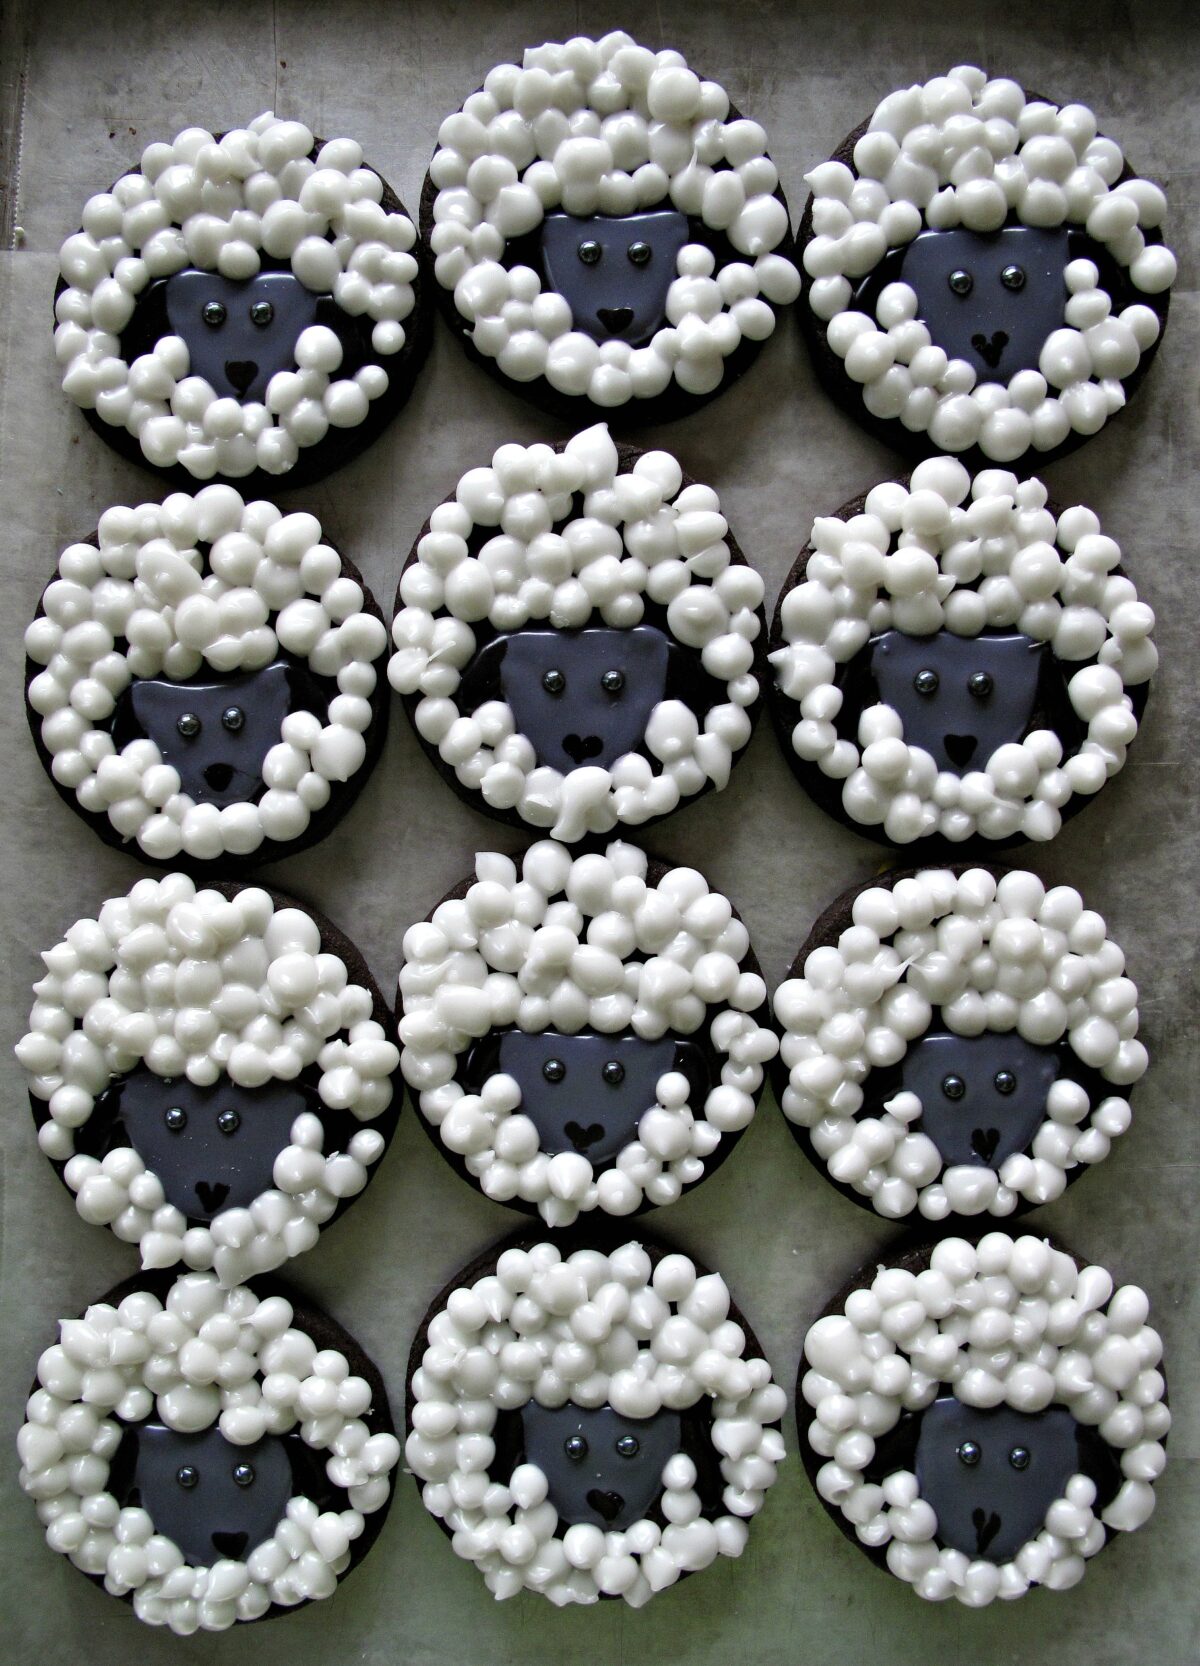 Round sugar cookies decorated with icing to look like sheep.